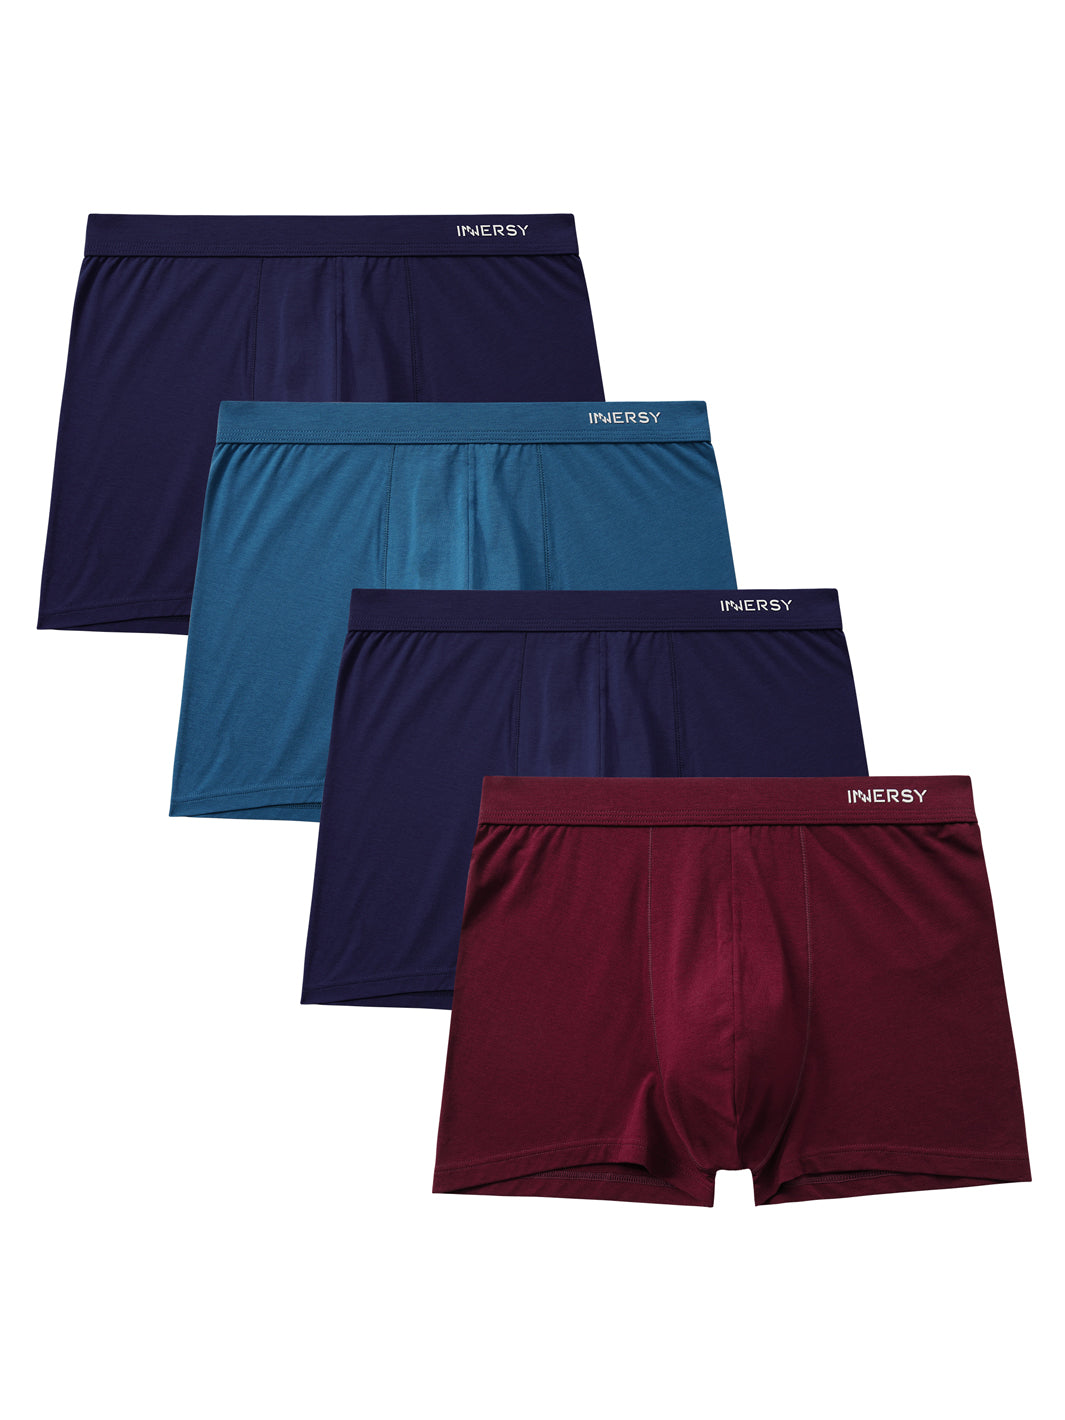 Men's Cotton Knit Boxer Shorts 4-Pack – Innersy Store